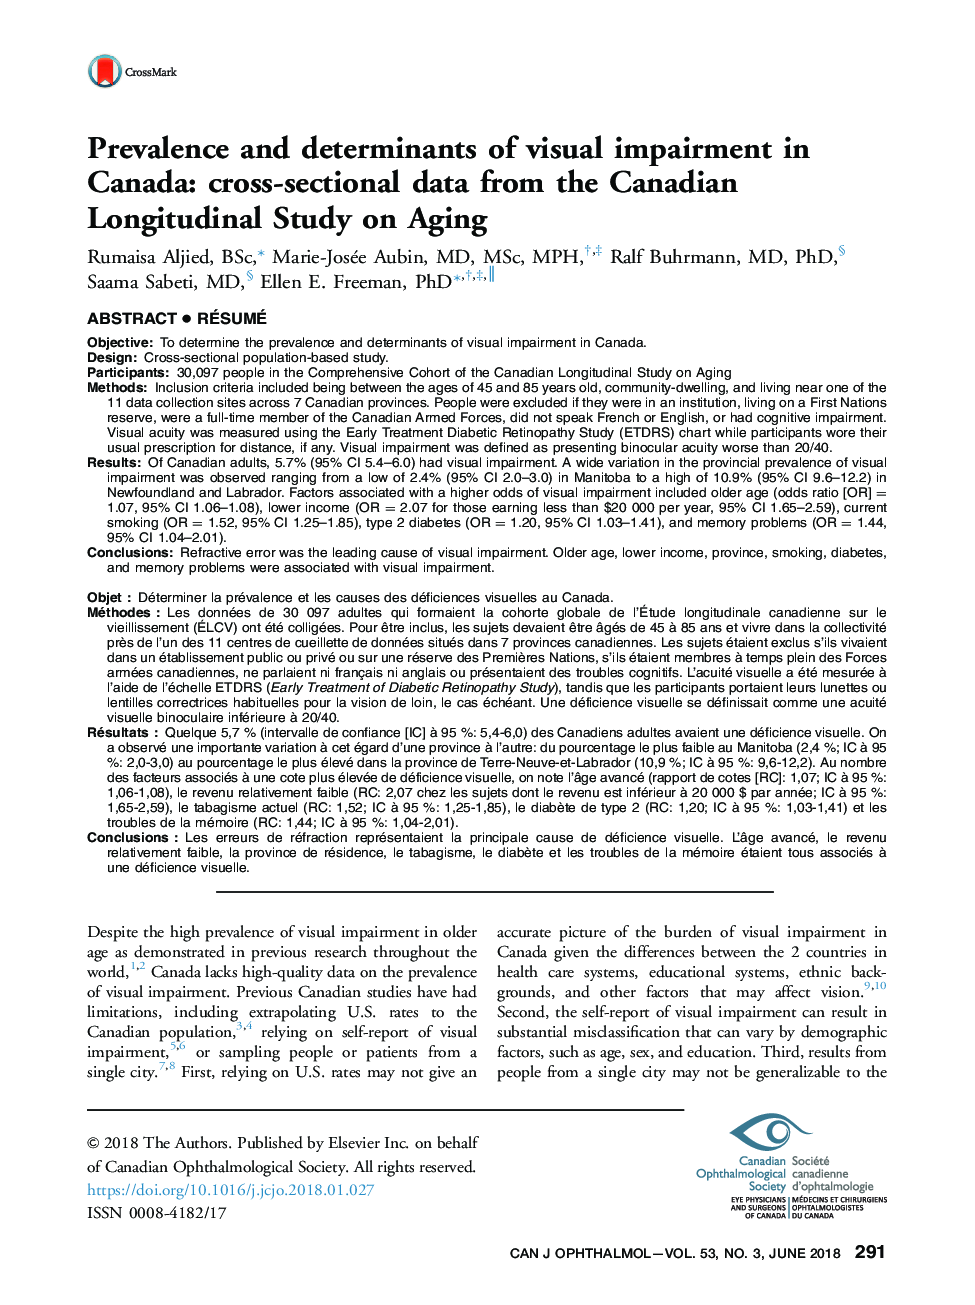 Prevalence and determinants of visual impairment in Canada: cross-sectional data from the Canadian Longitudinal Study on Aging